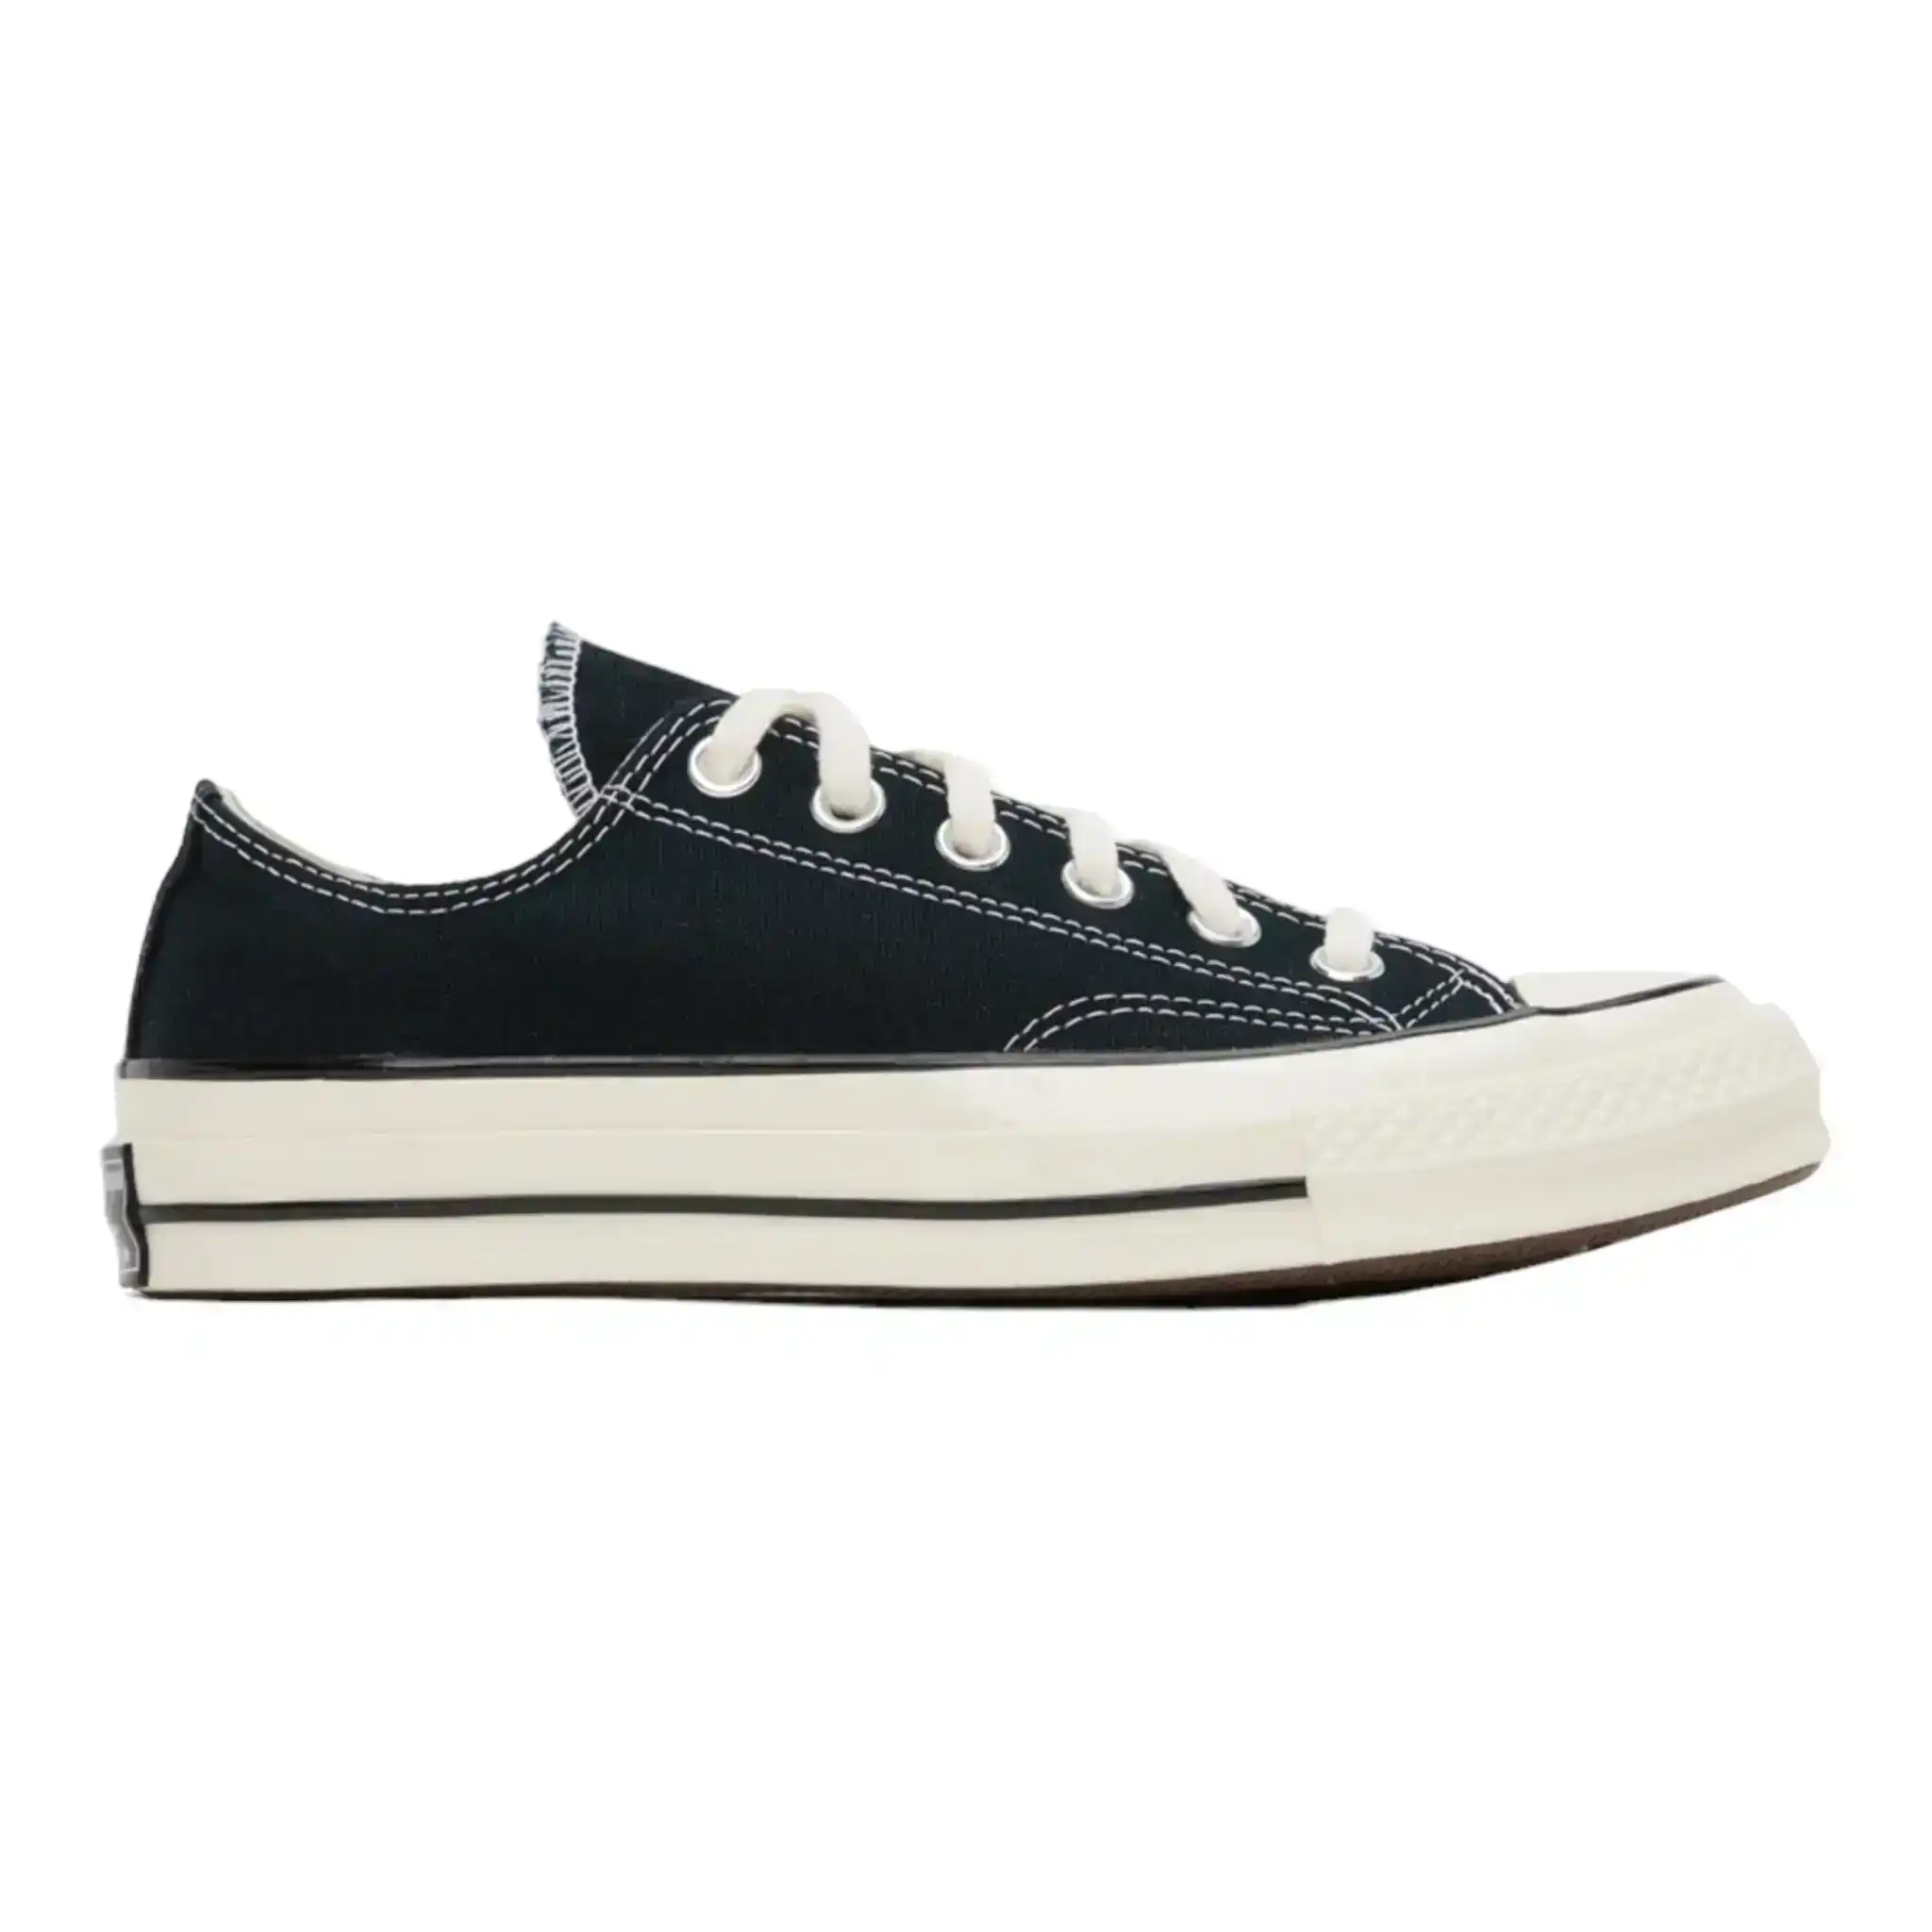 Converse chuck Taylor All Star 70 Low Black White